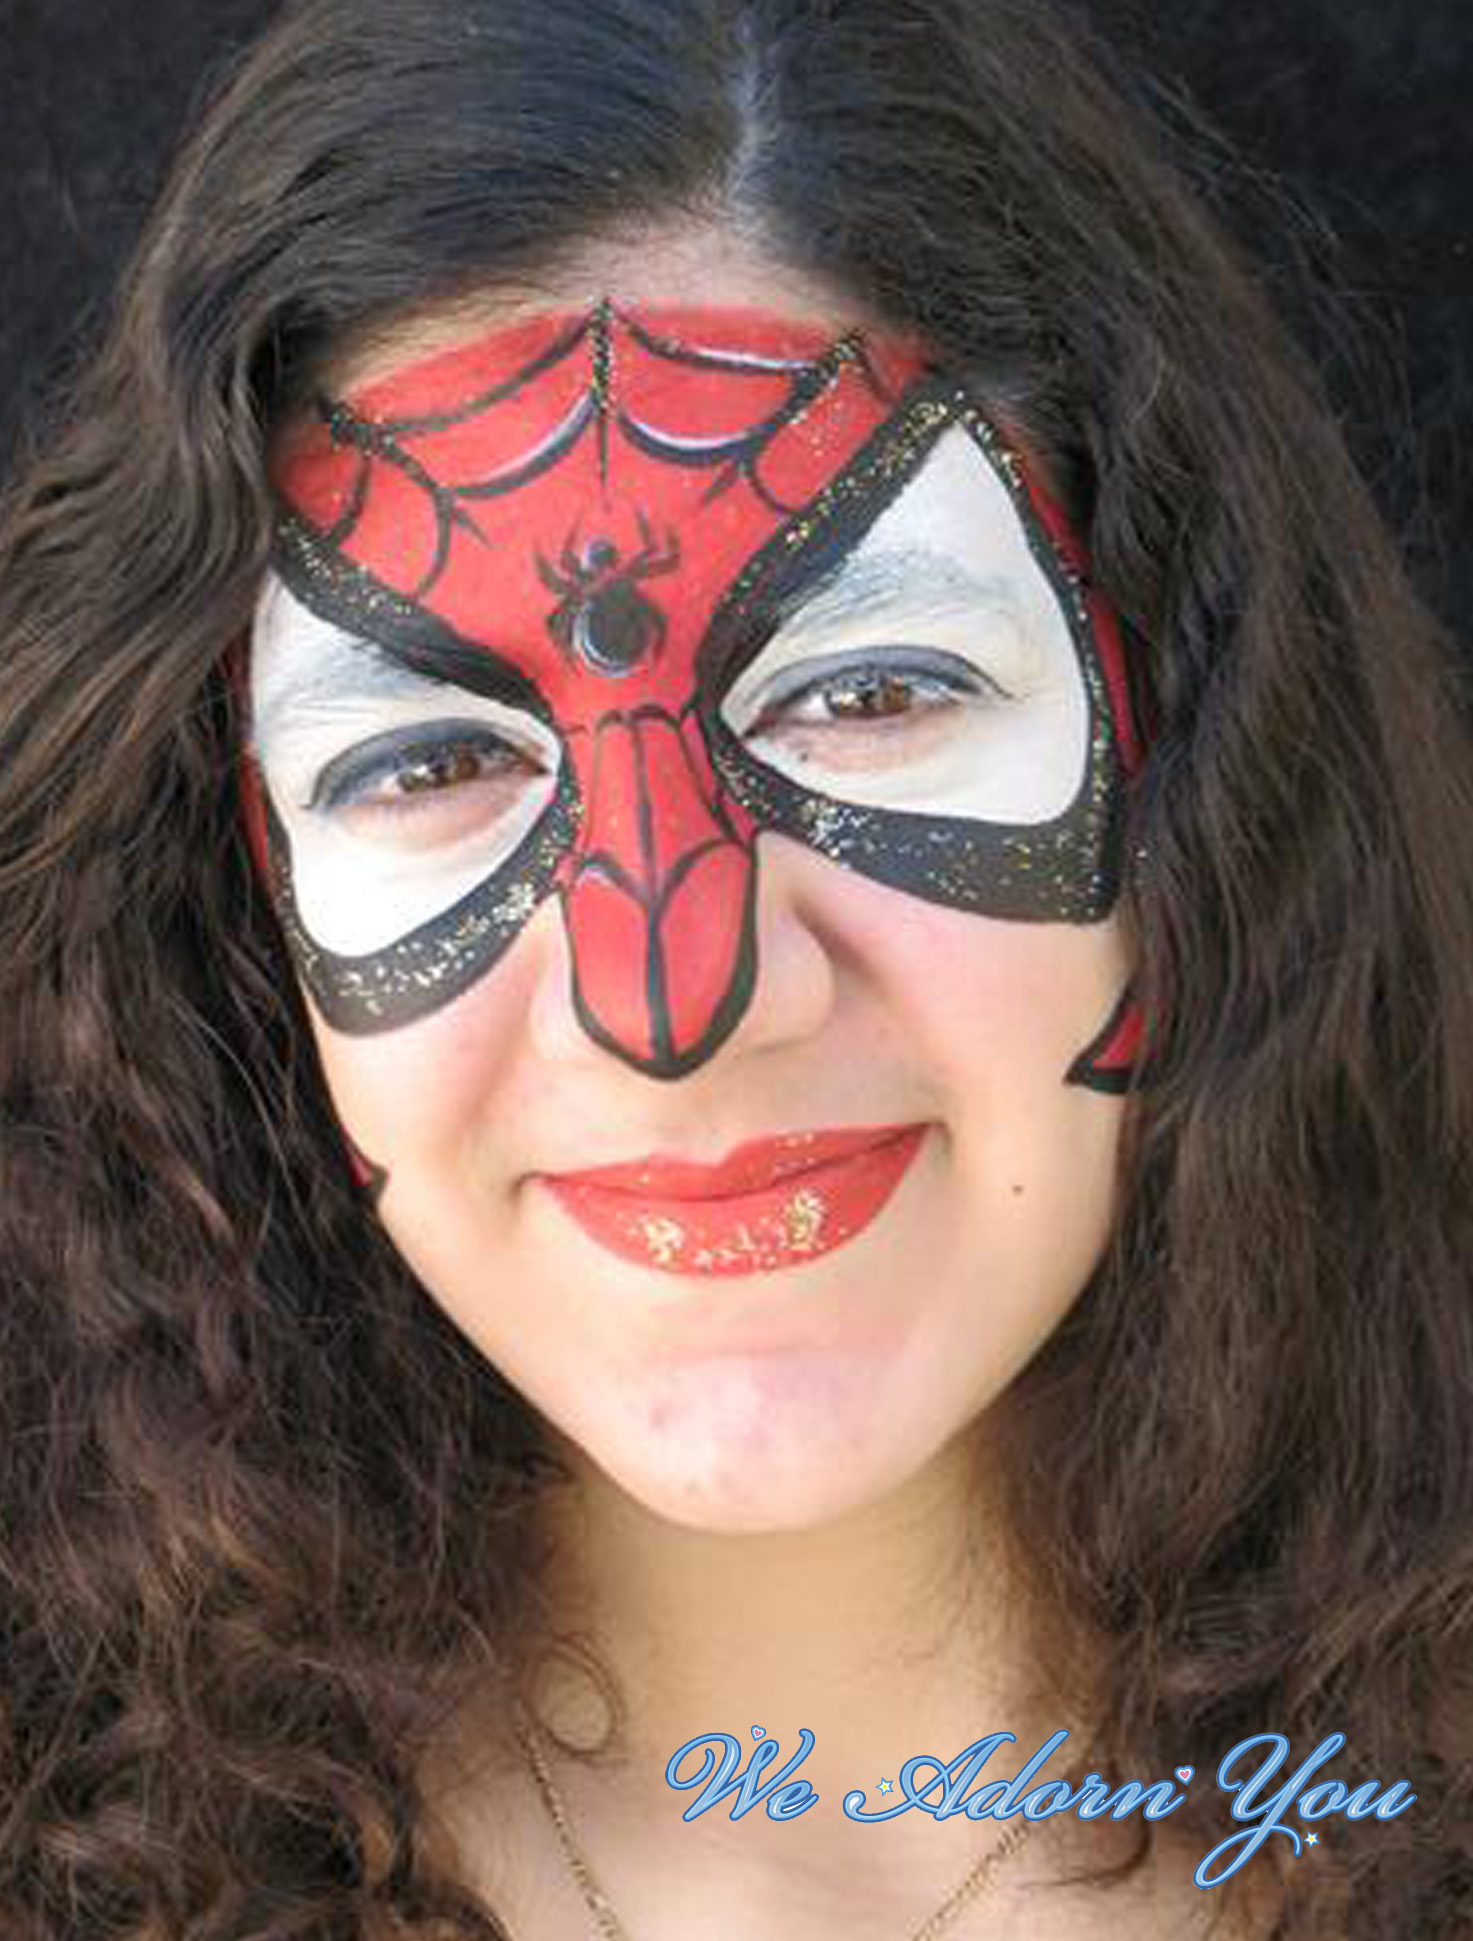 Face Painting SpiderGirl- We Adorn You.jpg